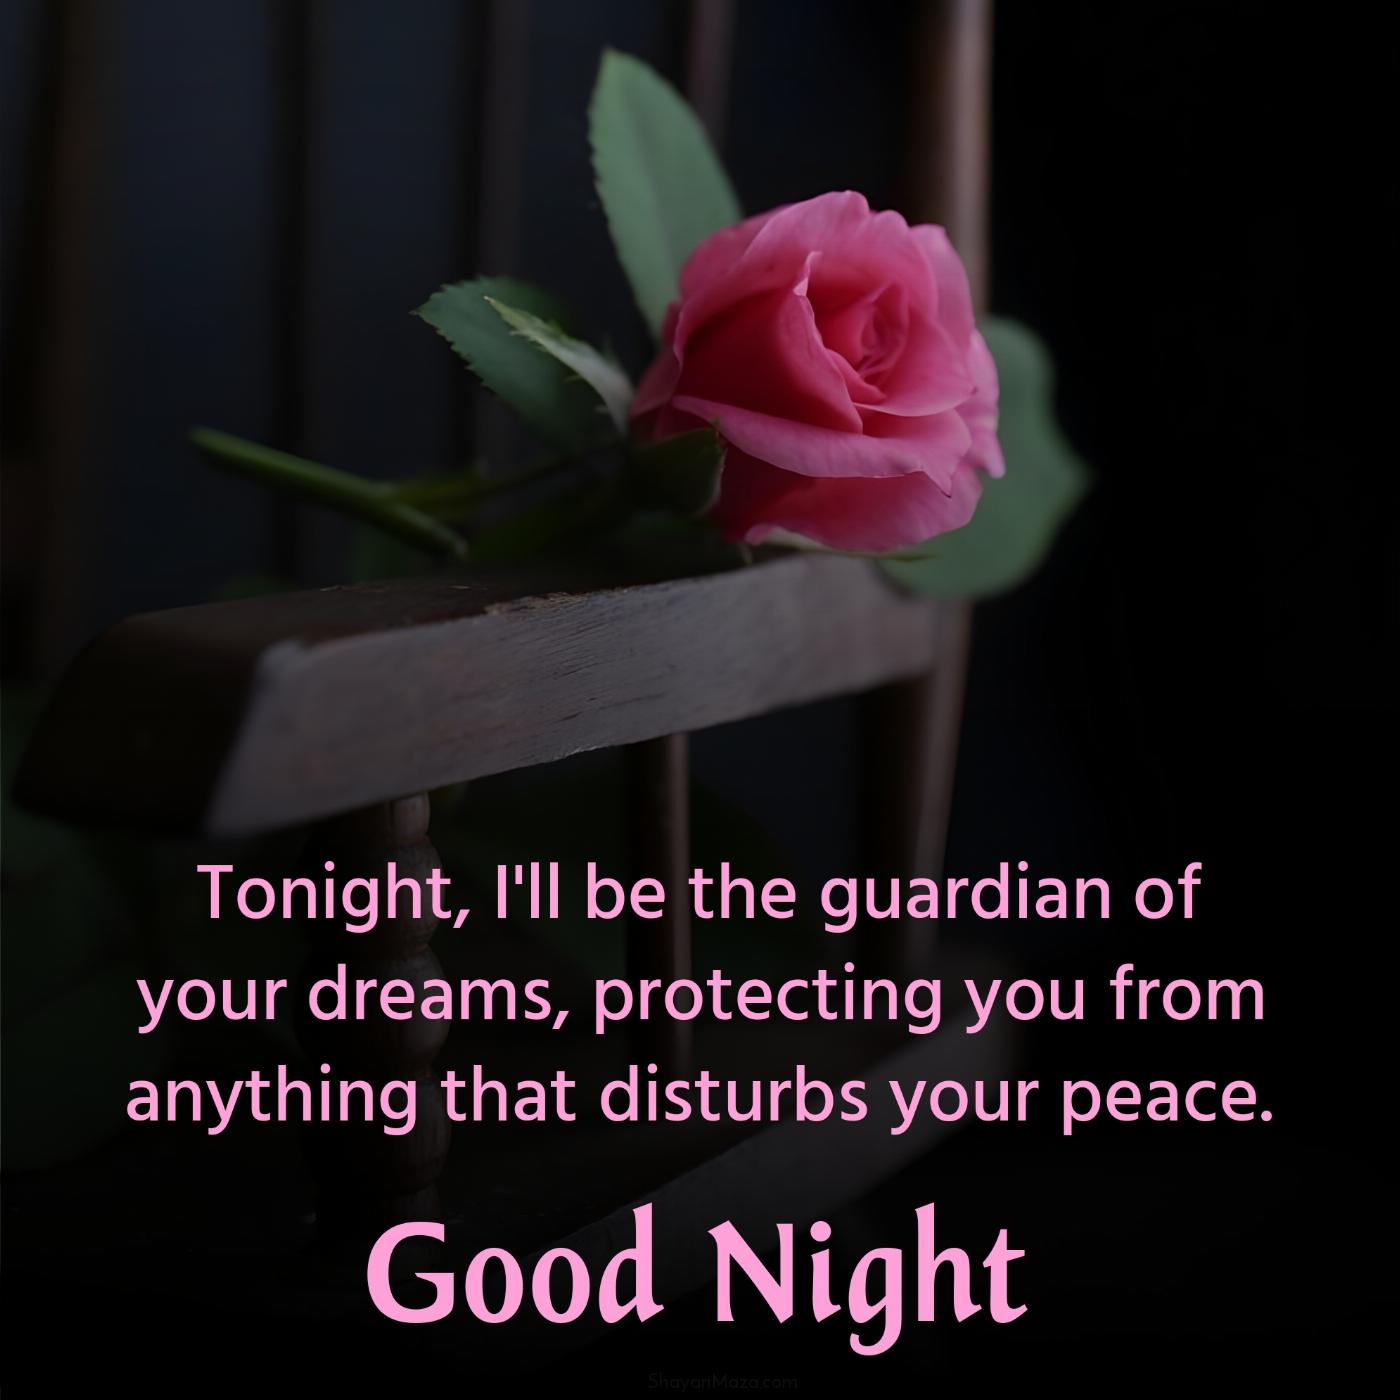 Tonight I'll be the guardian of your dreams protecting you